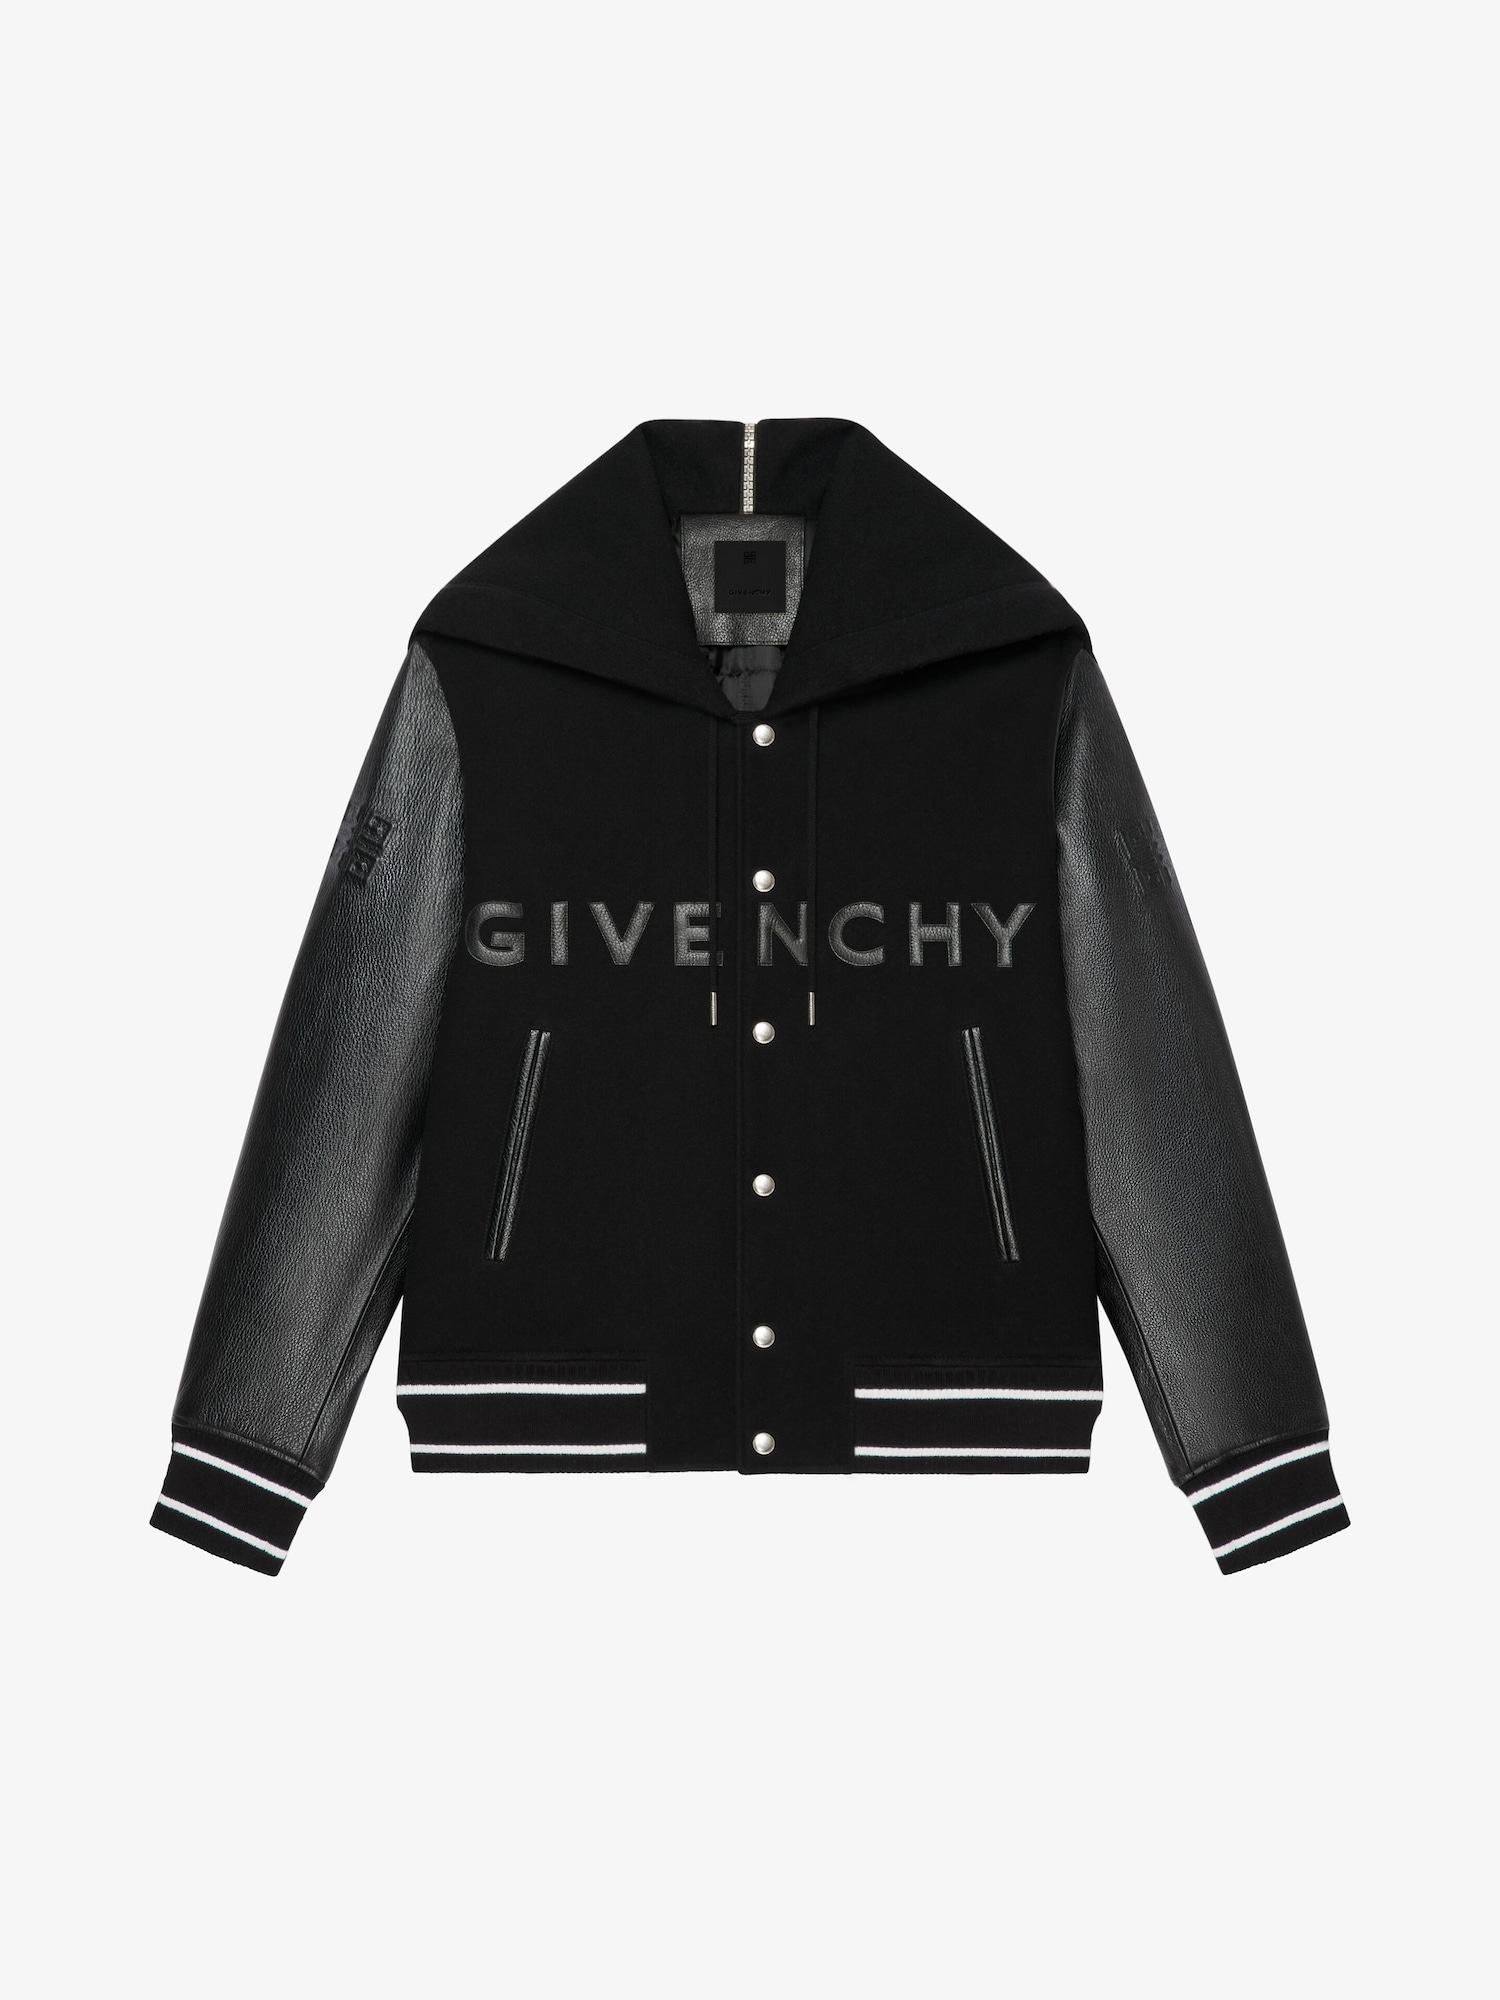 GIVENCHY hooded varsity jacket in wool and leather | Givenchy ASI ...